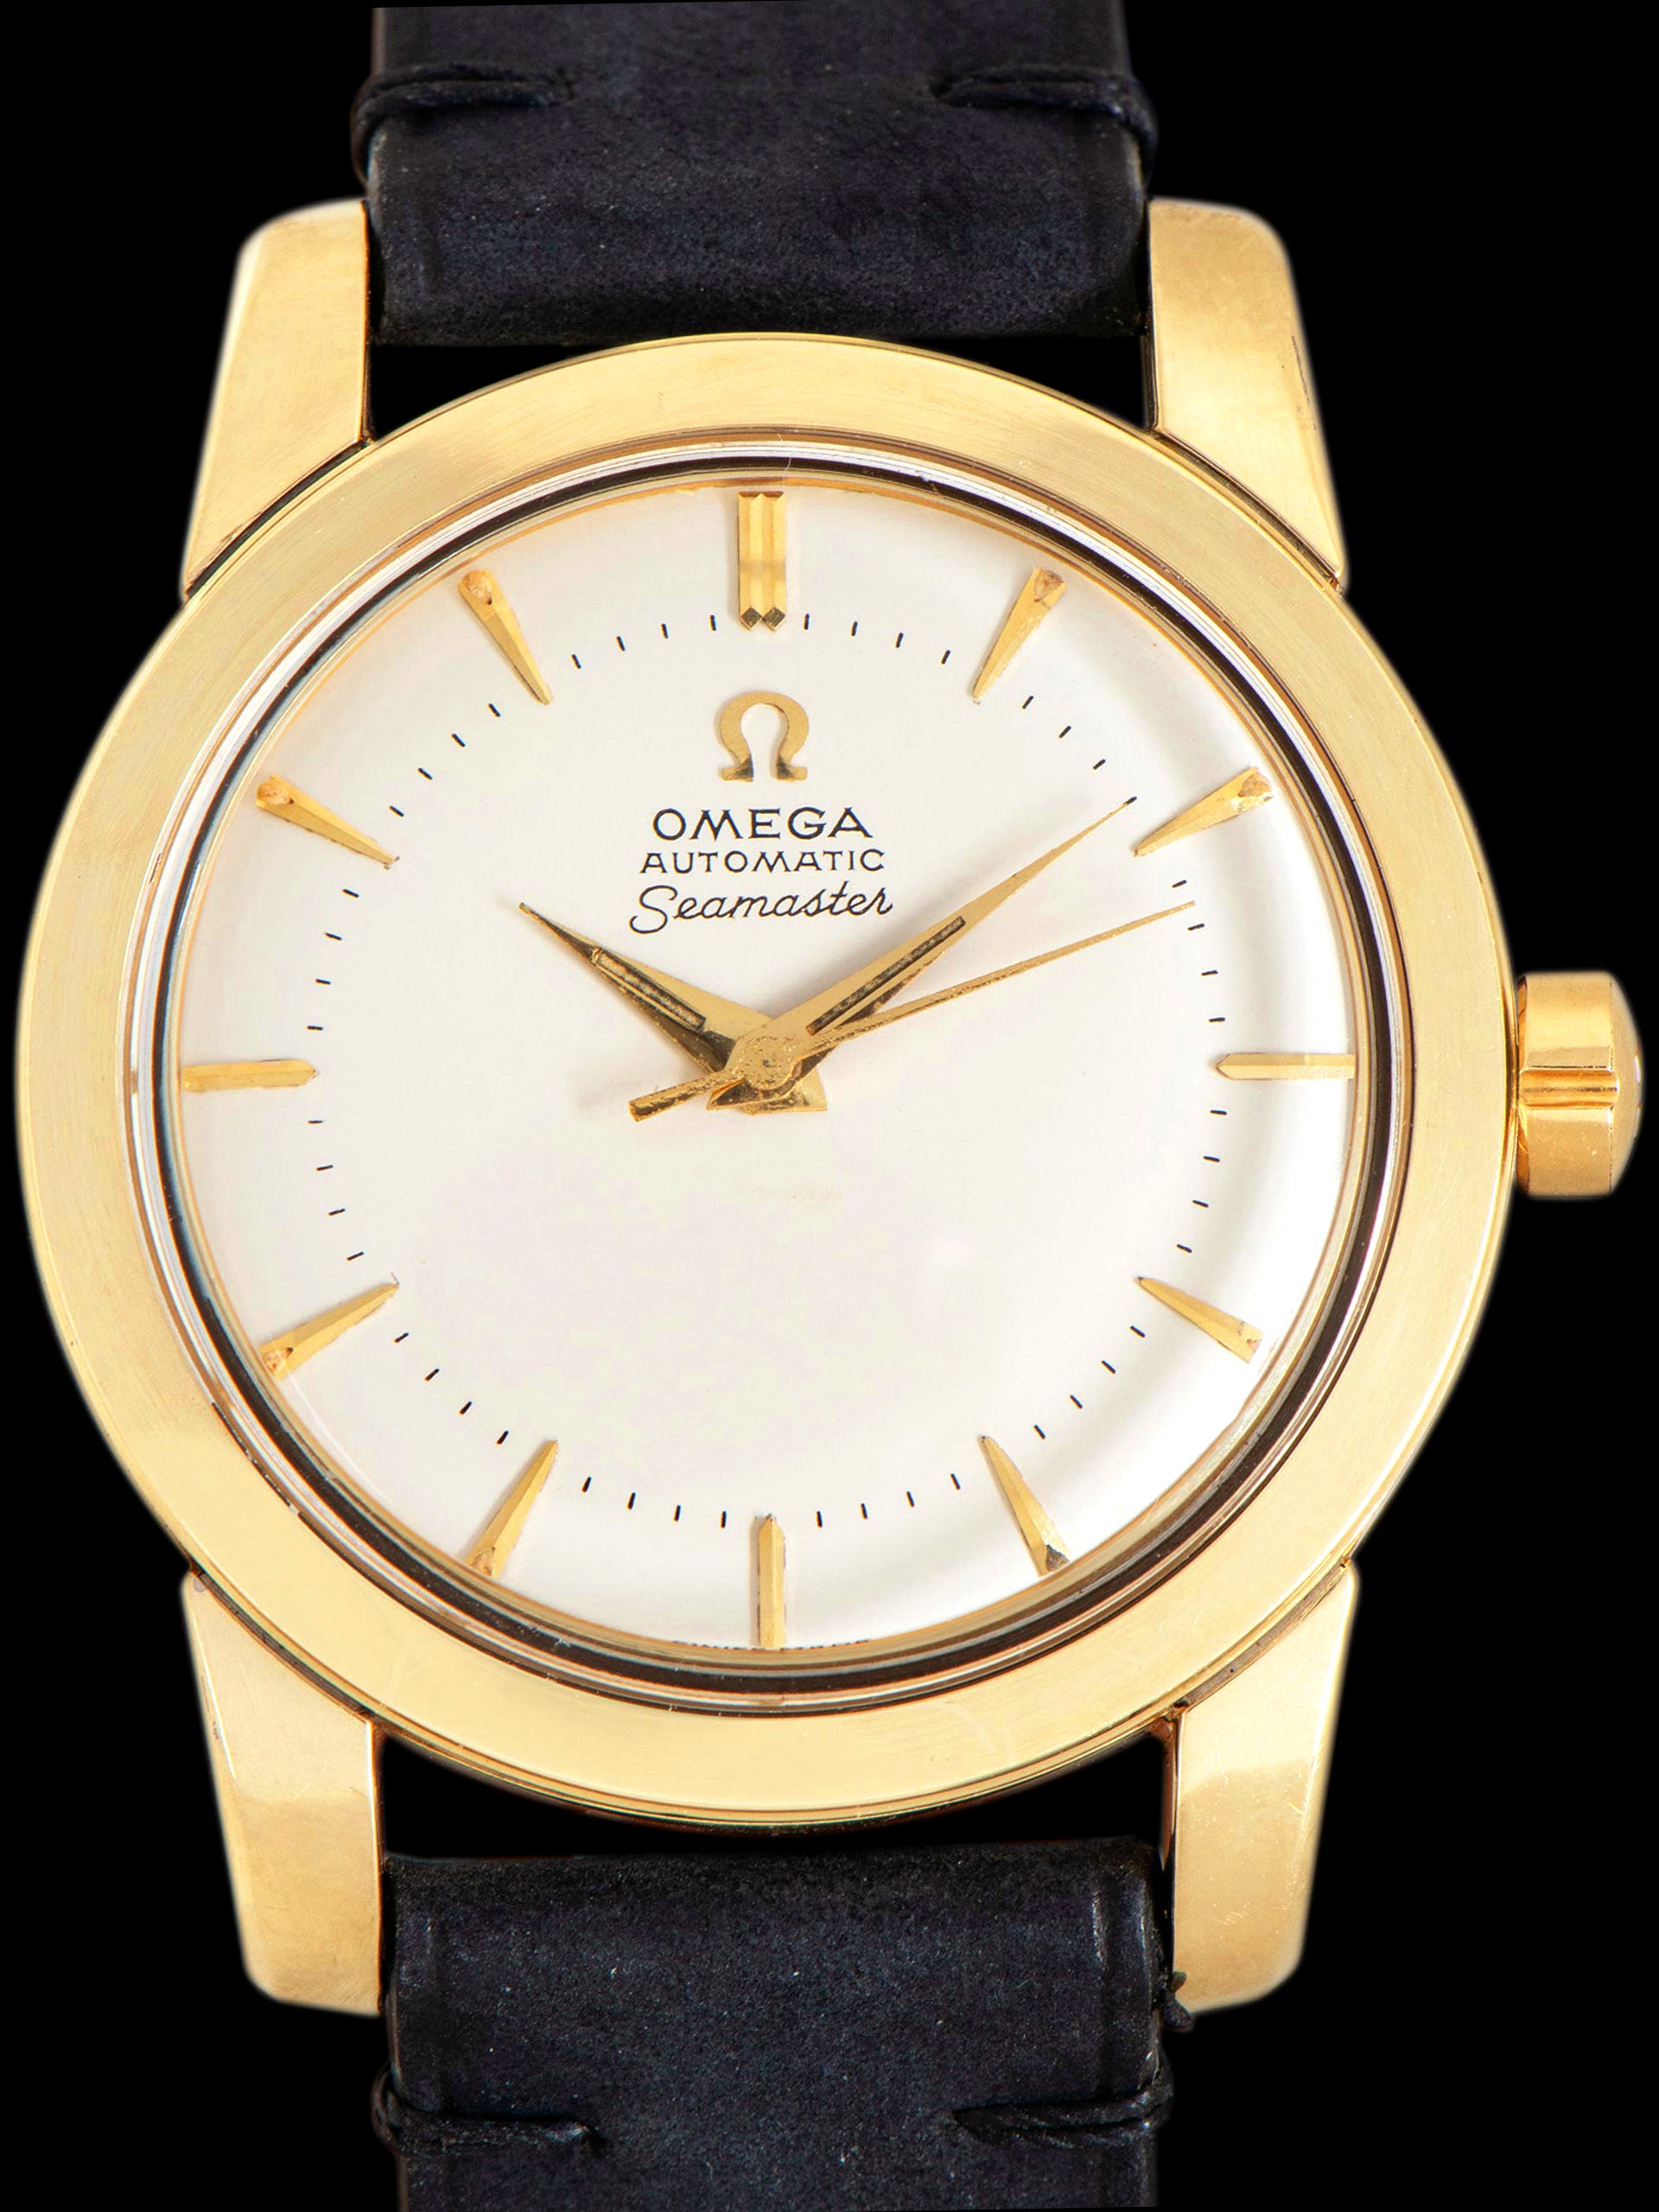 1954 Omega Seamaster Automatic Gold Cap (Ref. 2767-1SC) Cal. 354 "Formerly Awarded to TWA Employee"